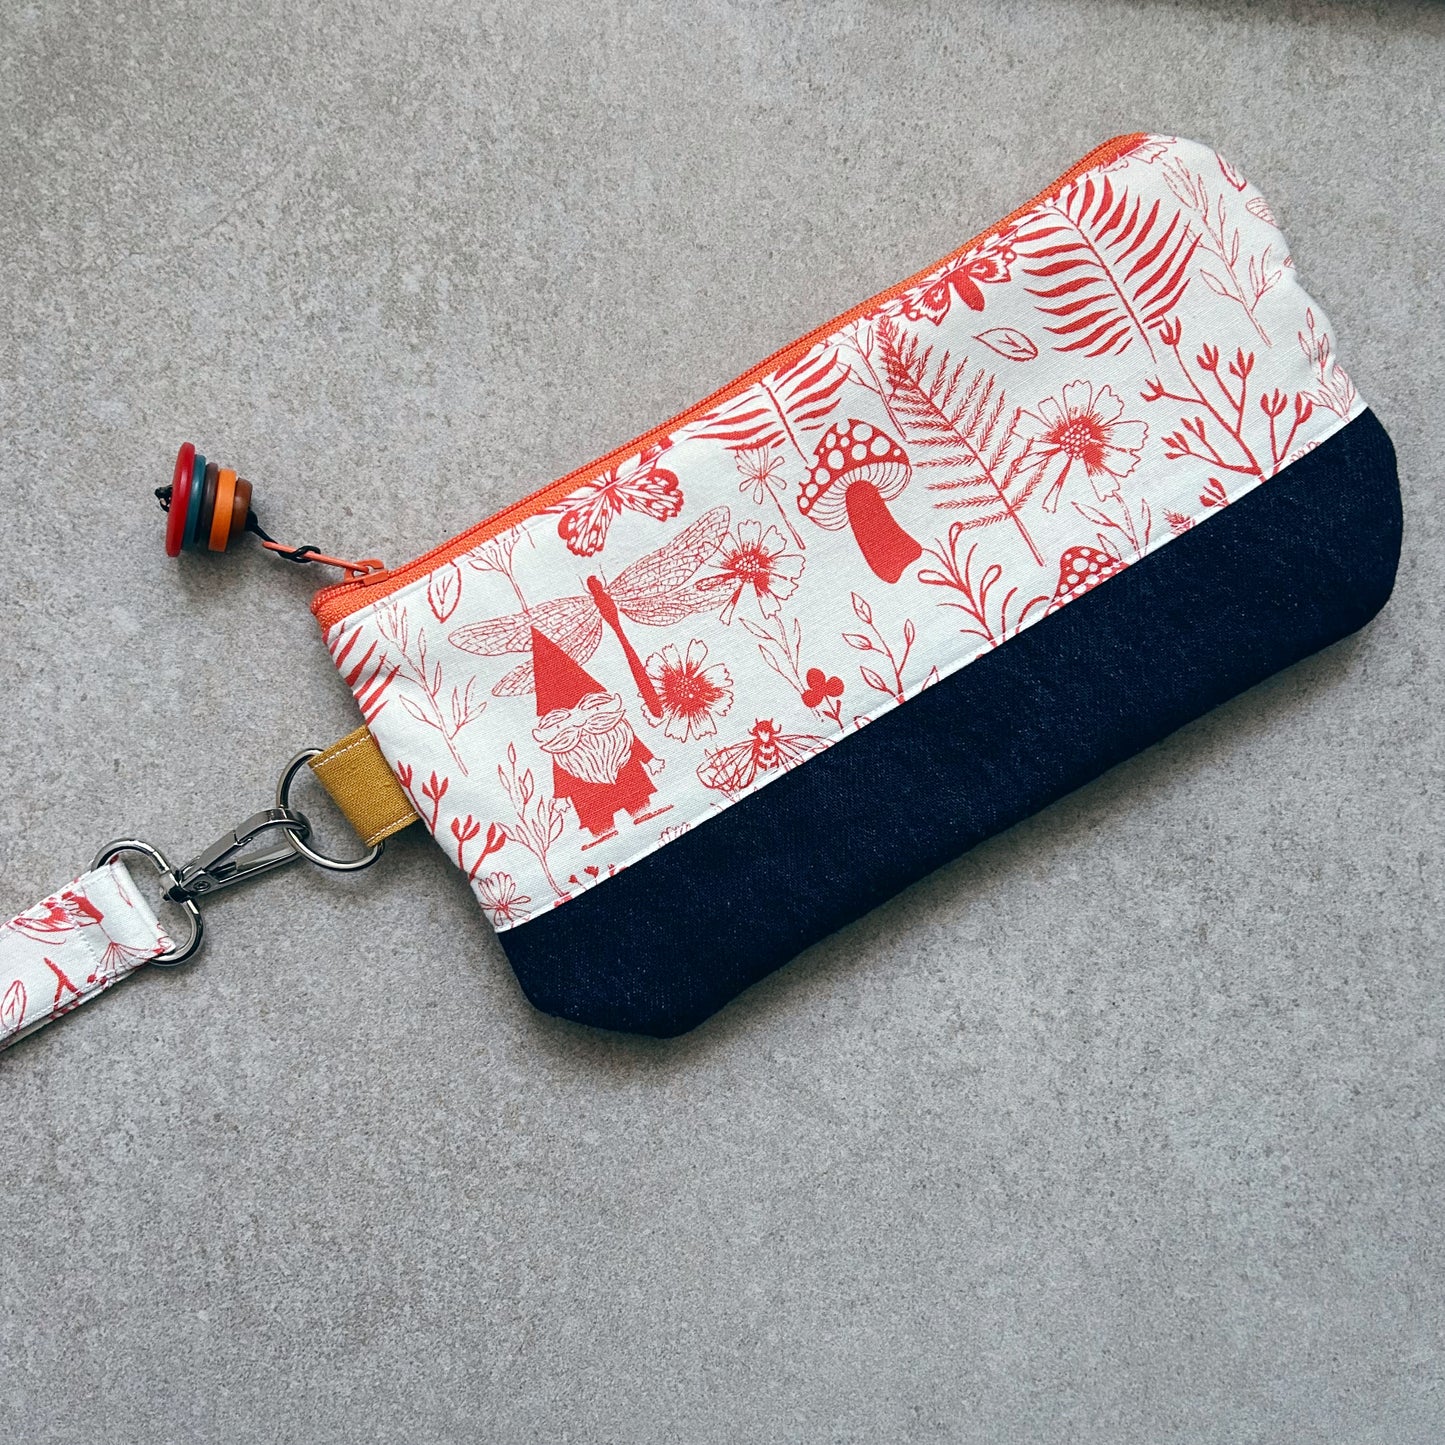 Fabric Zip Pouches with Wristlet Strap